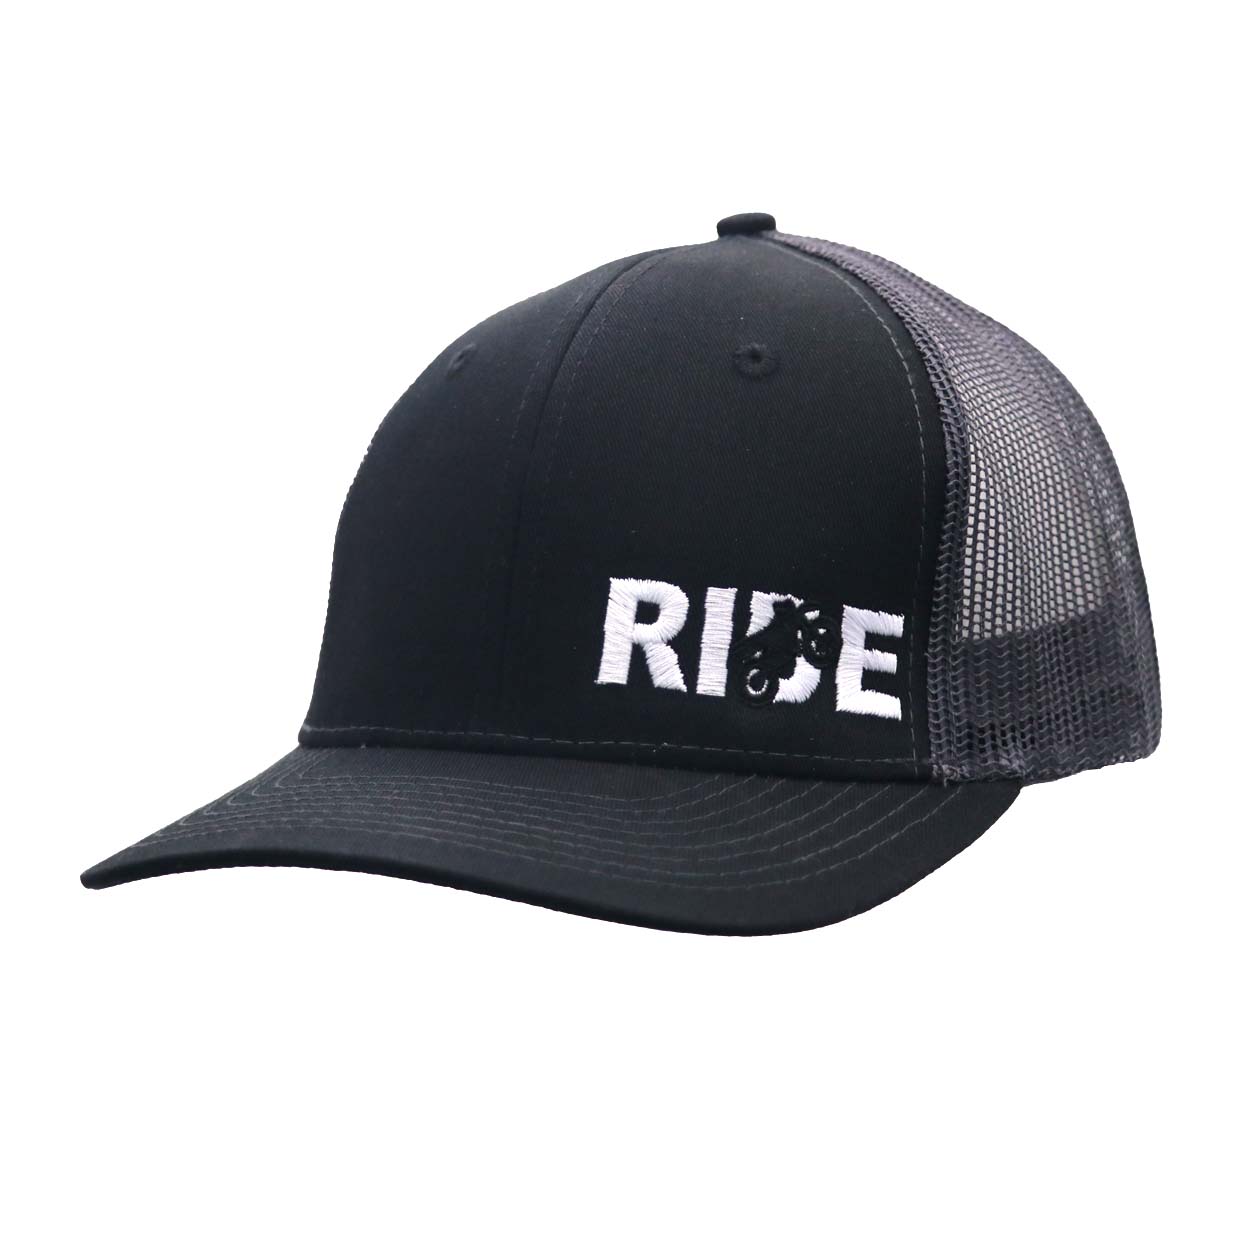 Ride Moto Logo Night Out Embroidered Snapback Trucker Hat Black/Gray